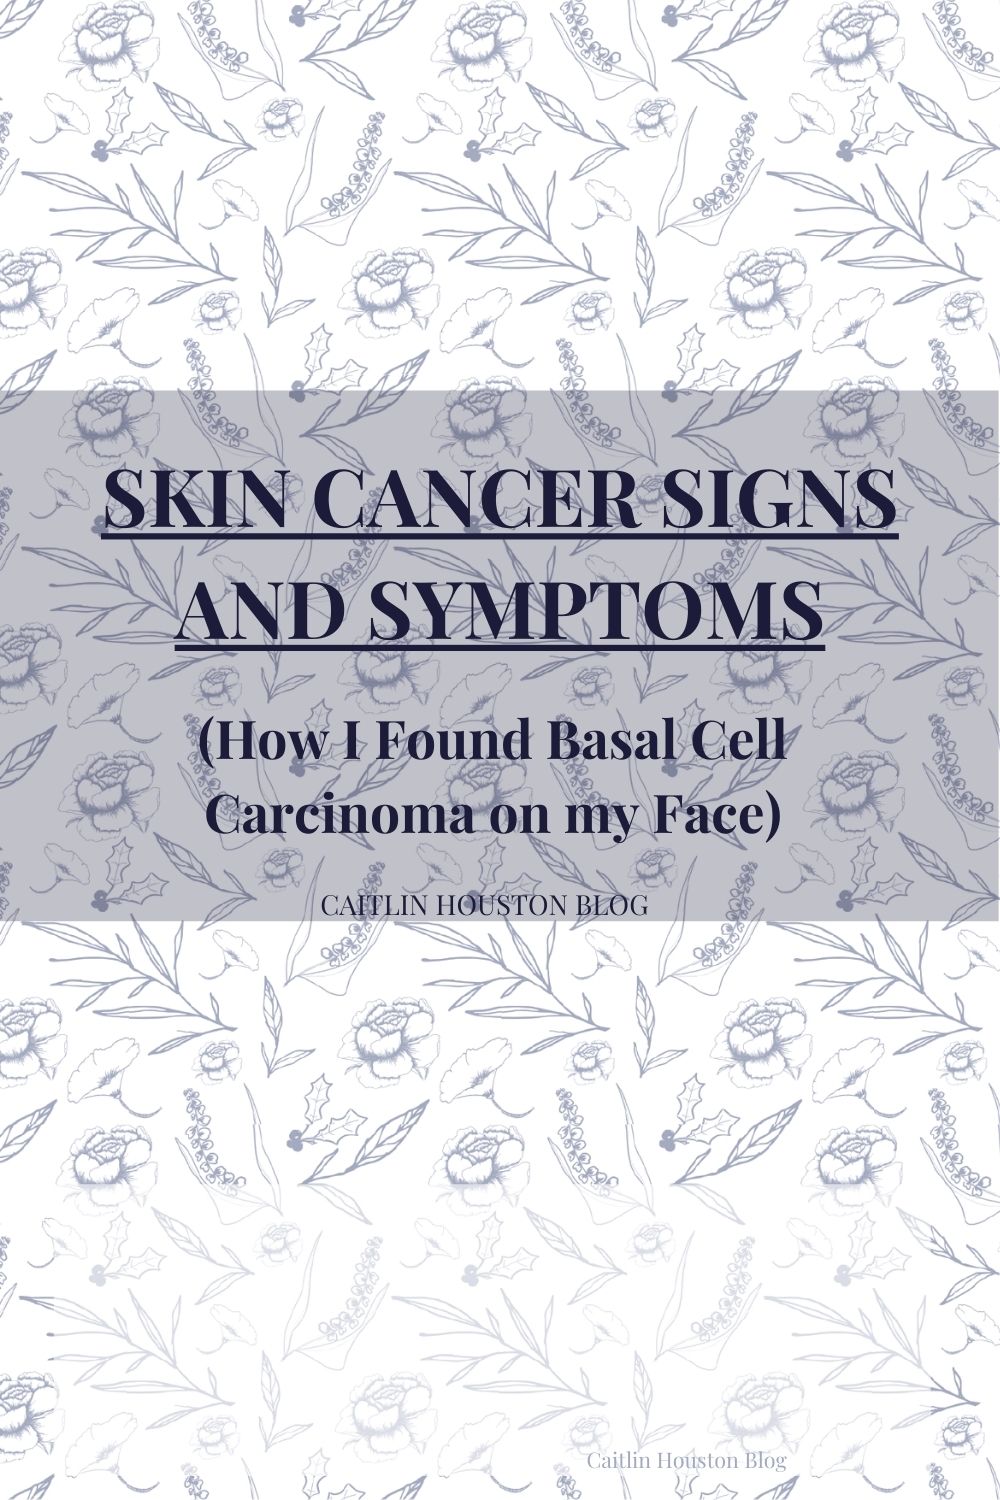 Skin Cancer Signs and Symptoms